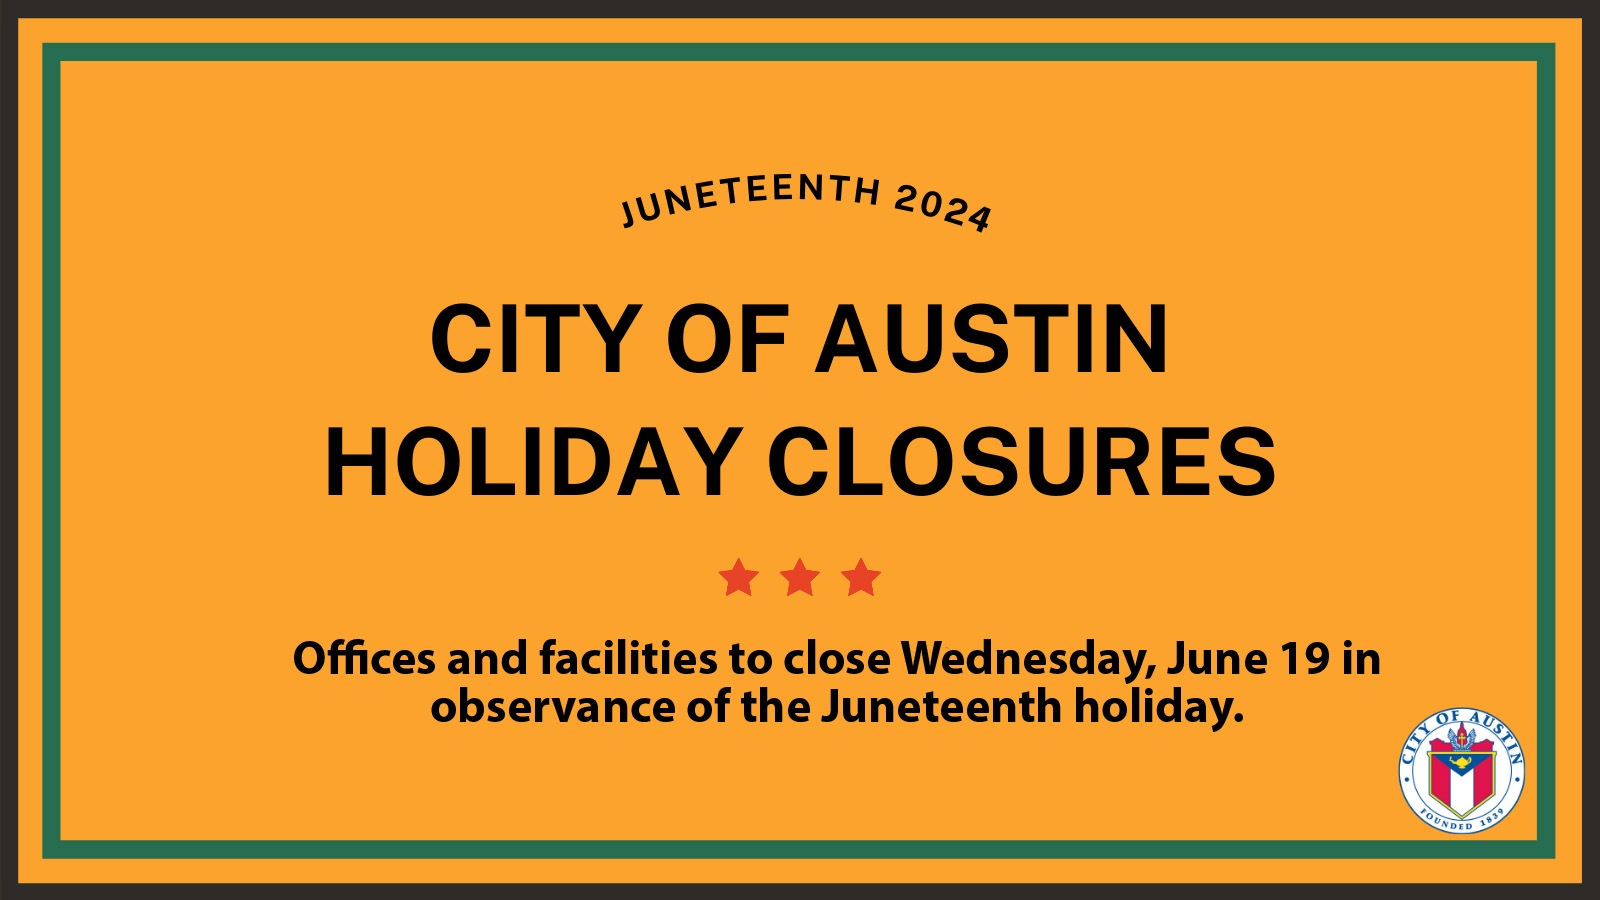 City of Austin Closures for Juneteenth 2024